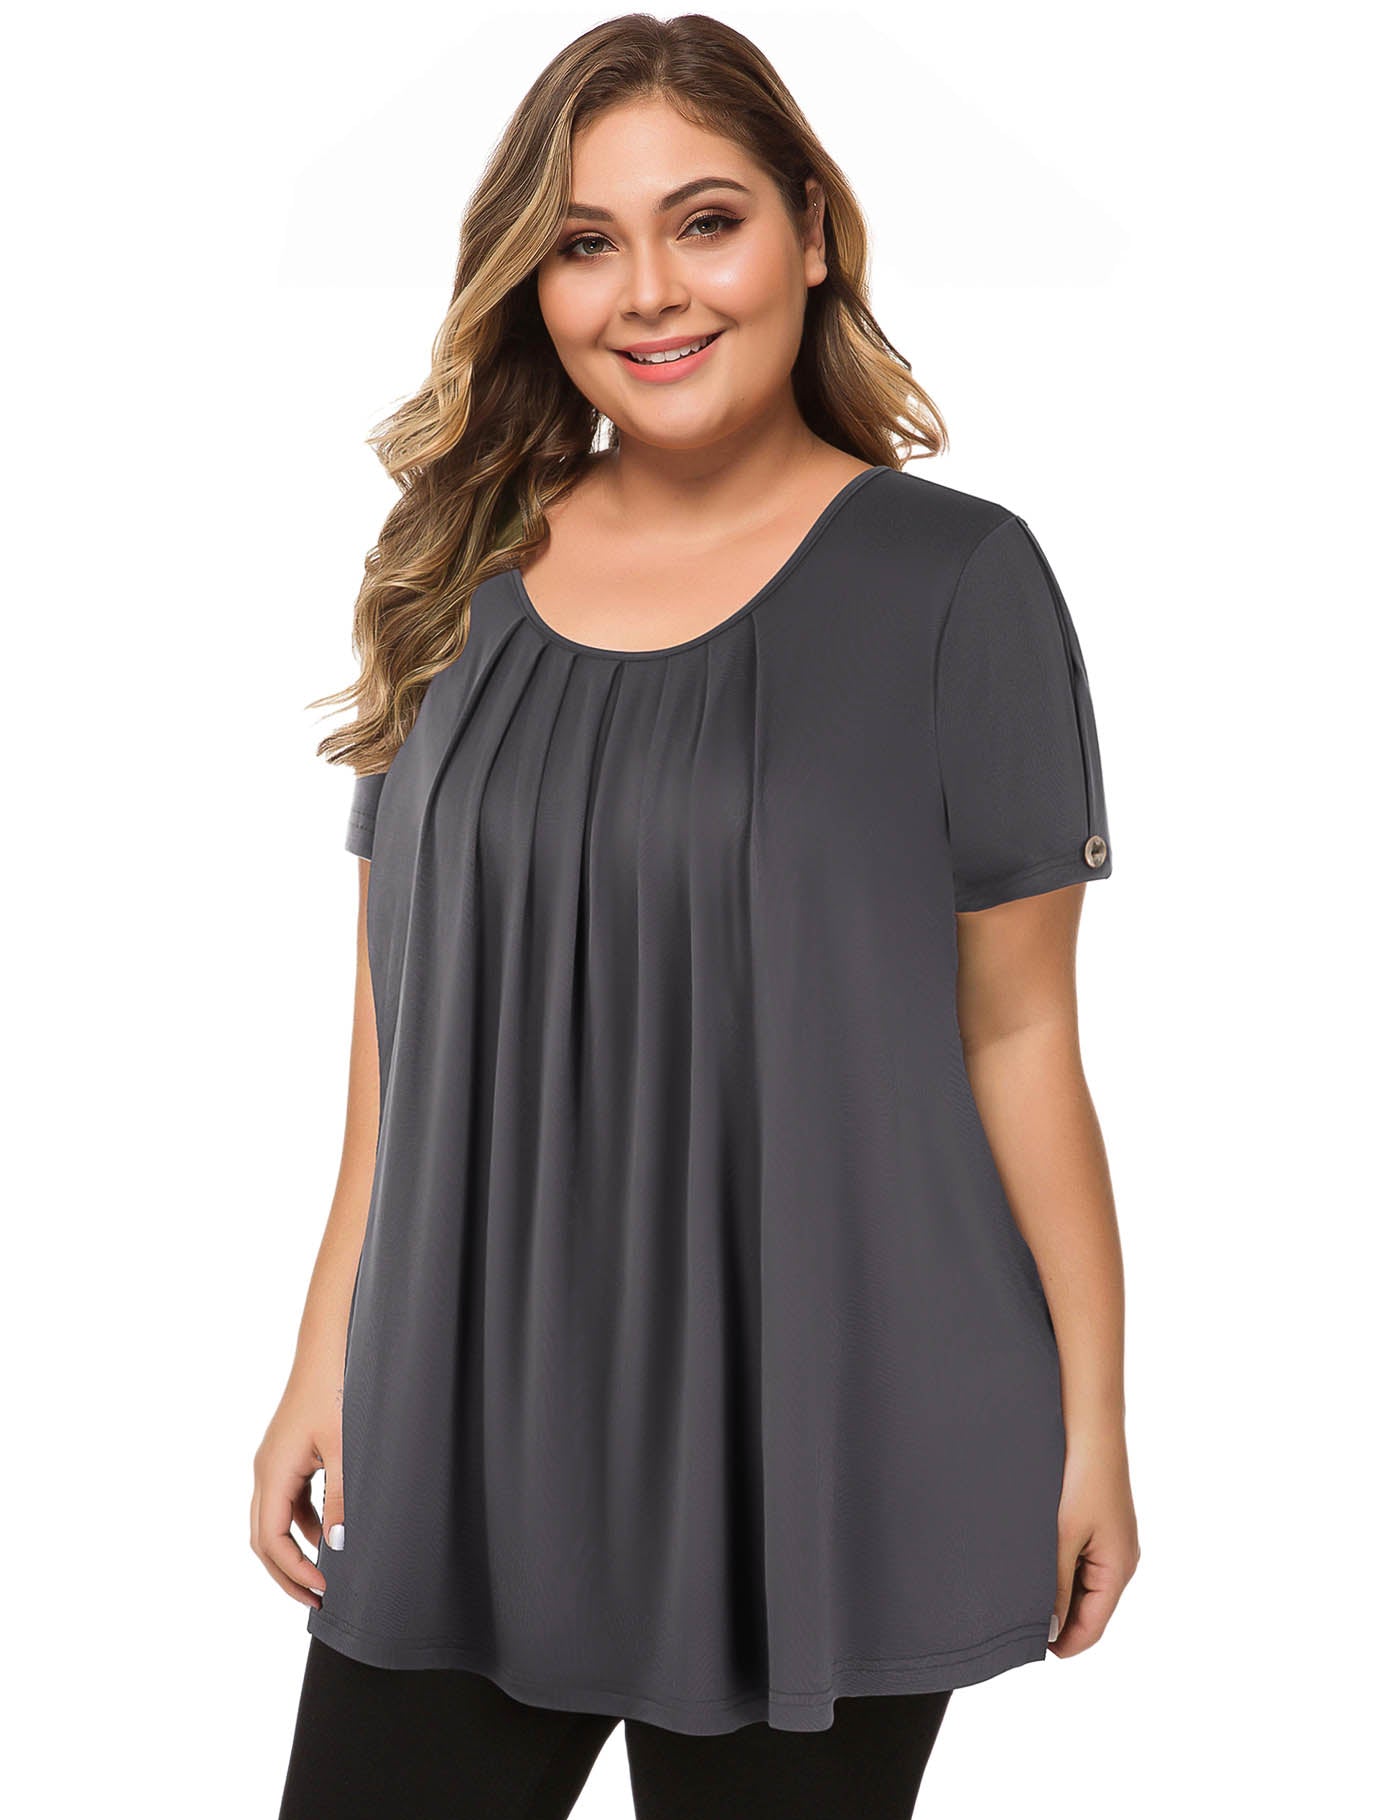 Plus Size Top For Women Casual Short Sleeve Shirt